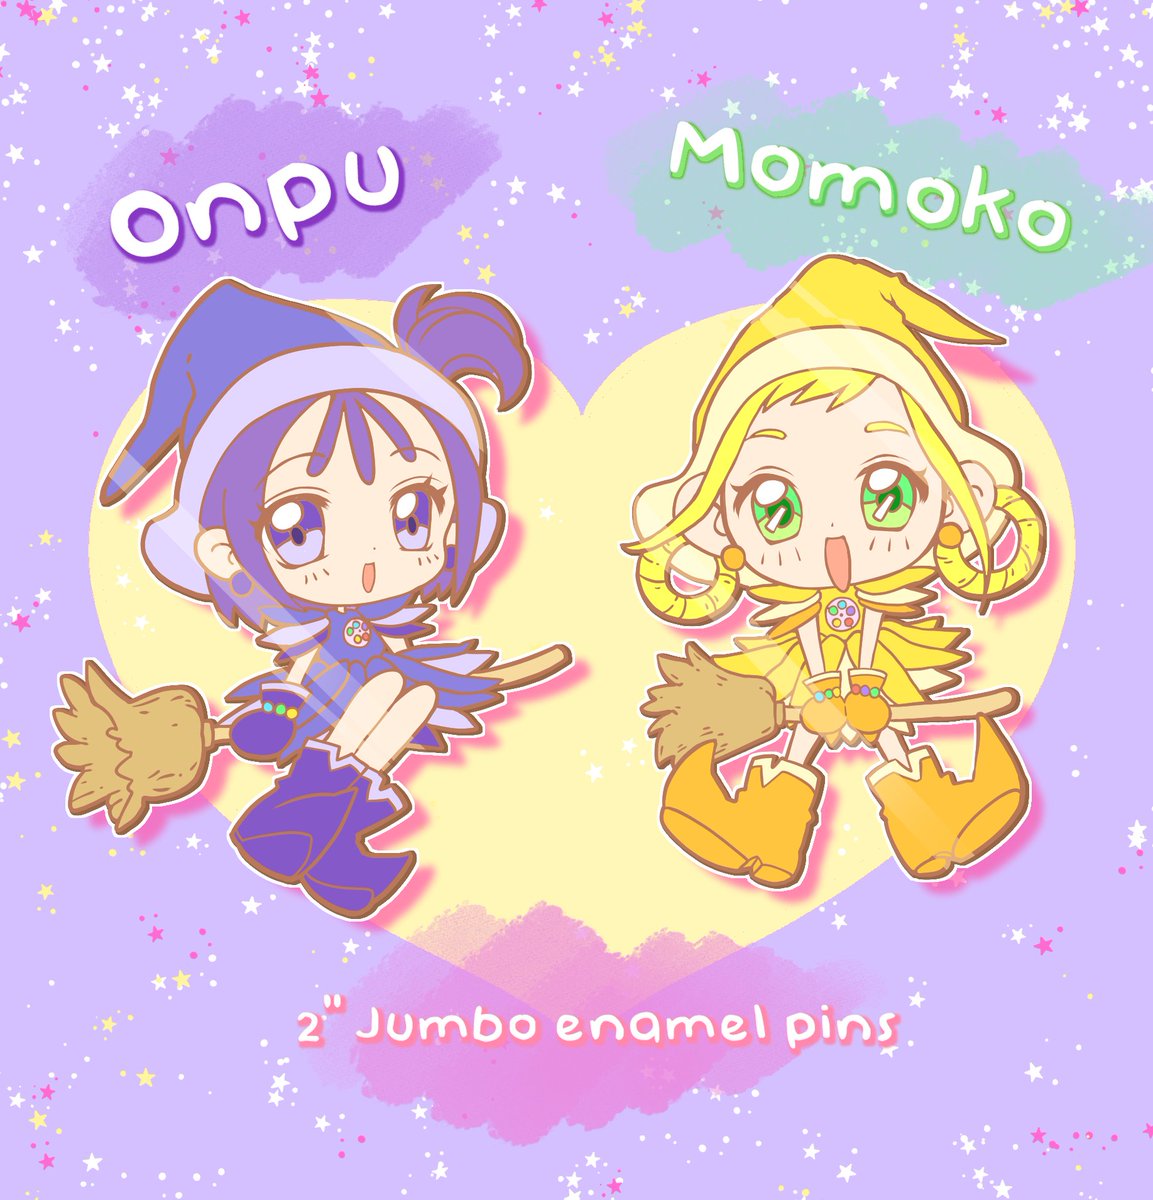 New magical girl enamel pin pre-orders are up now~> https://t.co/uLYmFR4vvx
Thanks all!⭐️ 